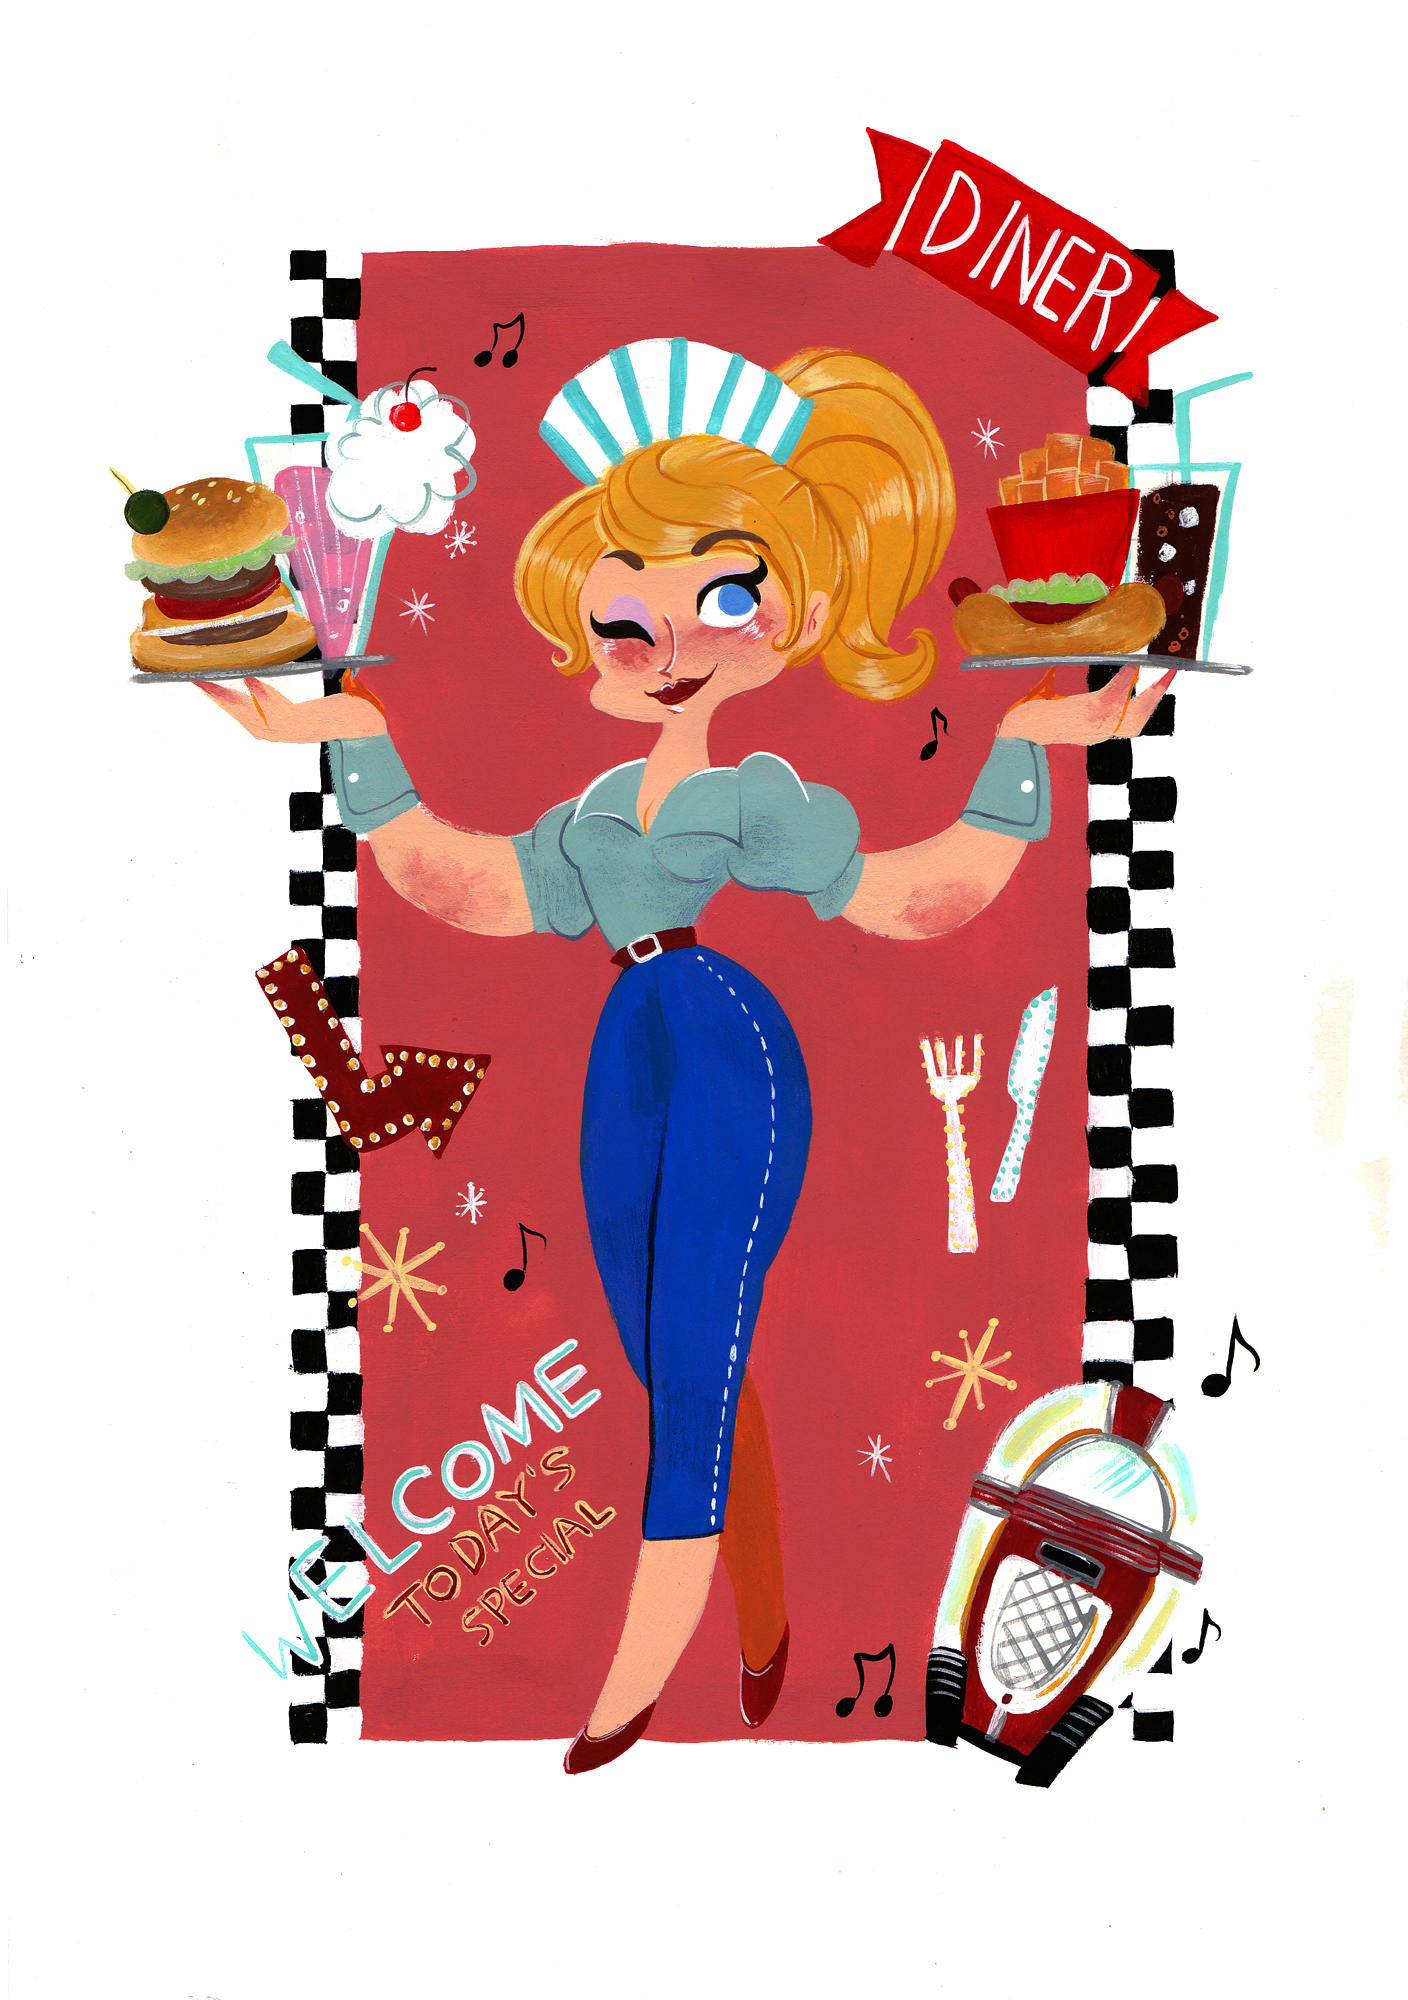 Welcome To Diner 現代アート 絵画の通販 販売サイト Thisisgallery ディスイズギャラリー